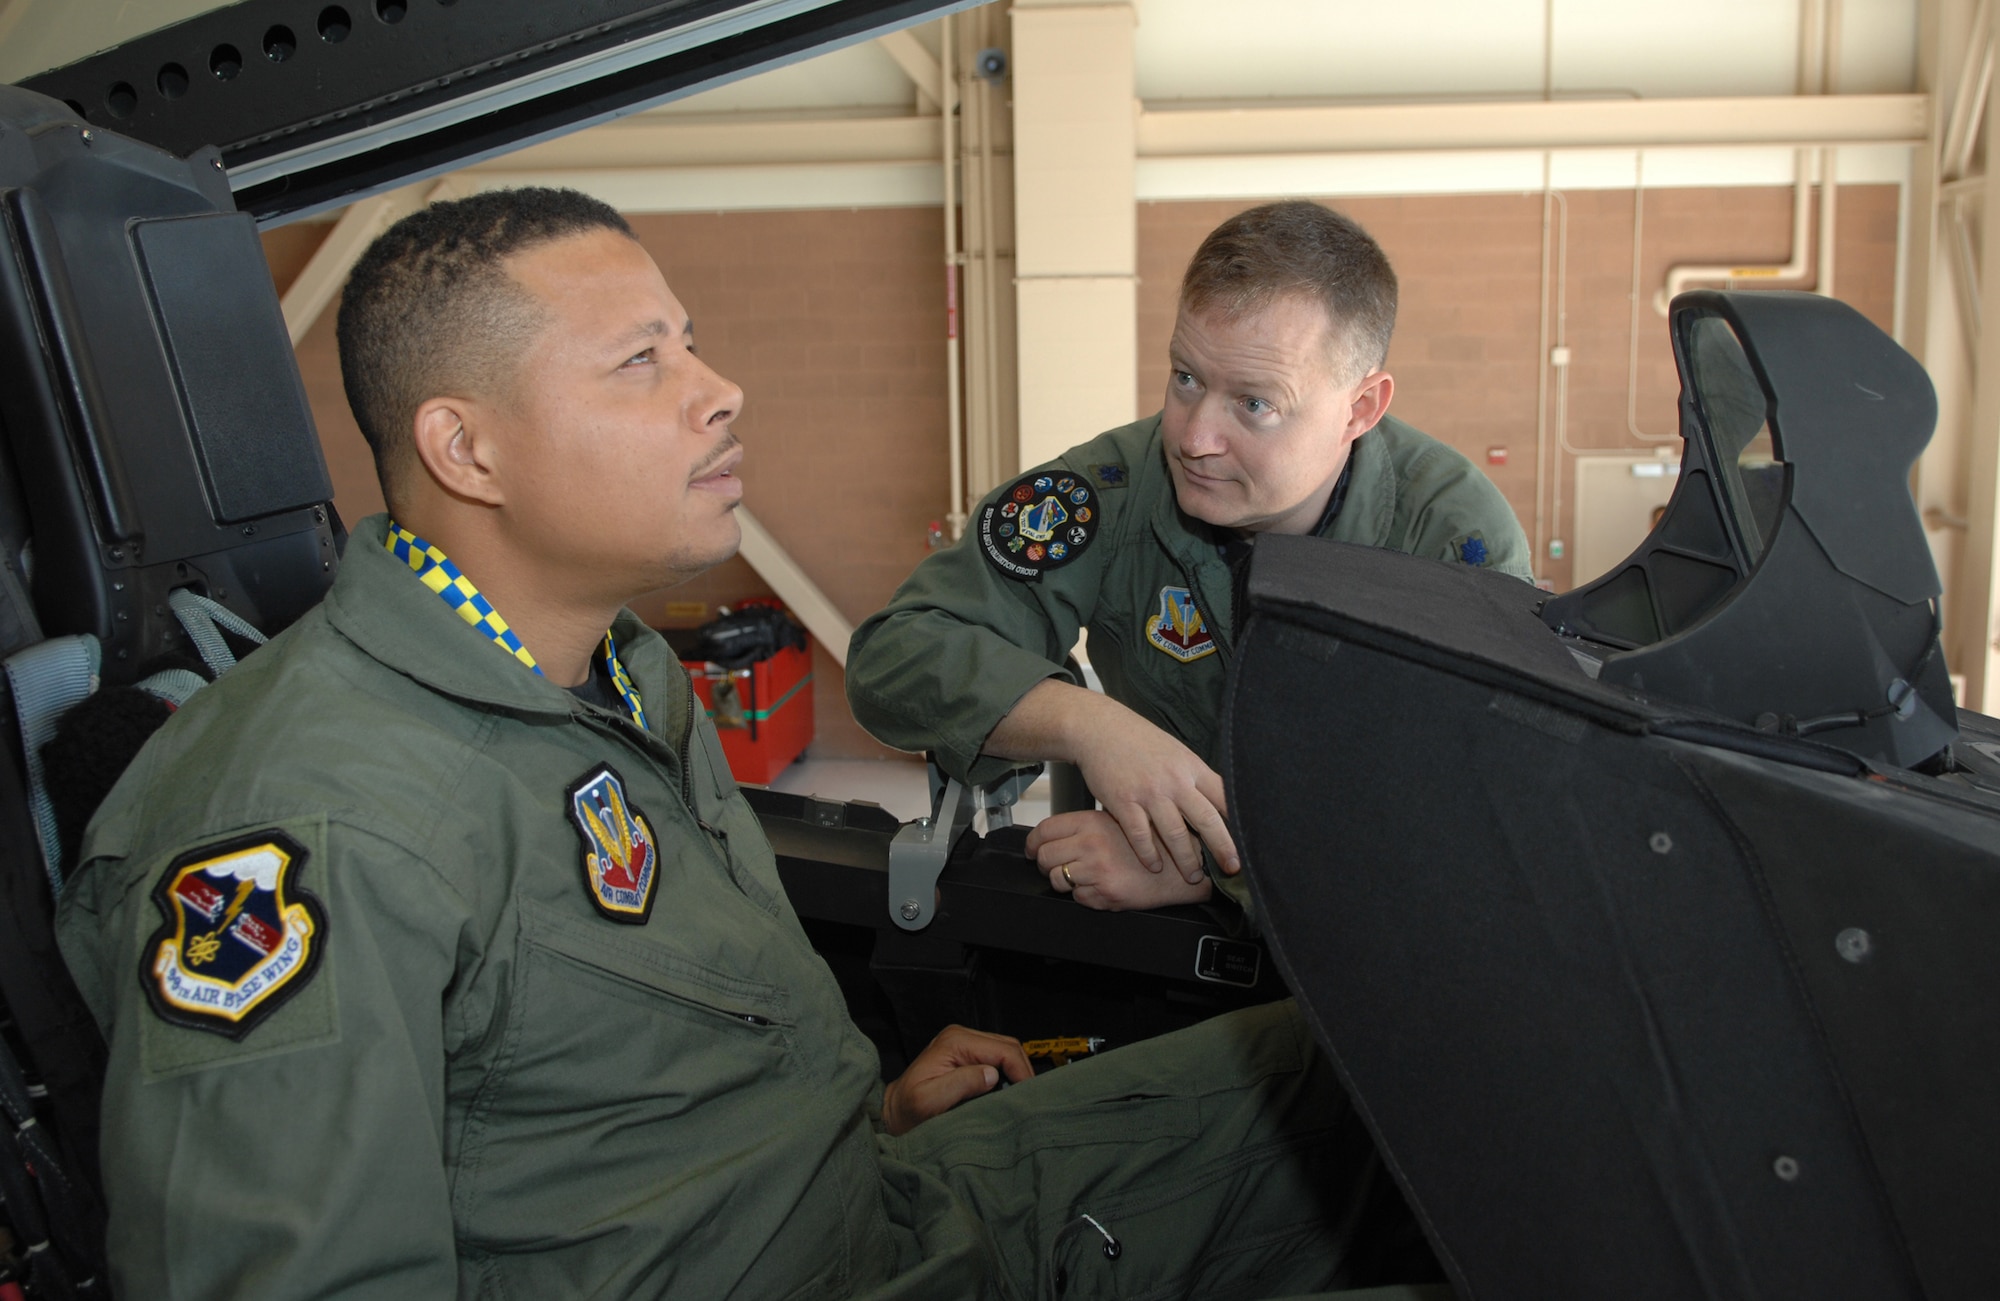 Lt. Colonel Dave Rose, 53rd Test and Evaluation Squadron deputy commander, briefs Oscar-nominated actor Terrence Howard on the F-22 Raptor at Nellis Air Force Base, Nev. on March 16. Mr. Howard will be starring in  “Iron Man,” which begins filming soon. The U.S. Air Force will be depicted in a number of scenes in the film. (U.S. Air Force photo by Tech. Sgt. Scottie McCord)